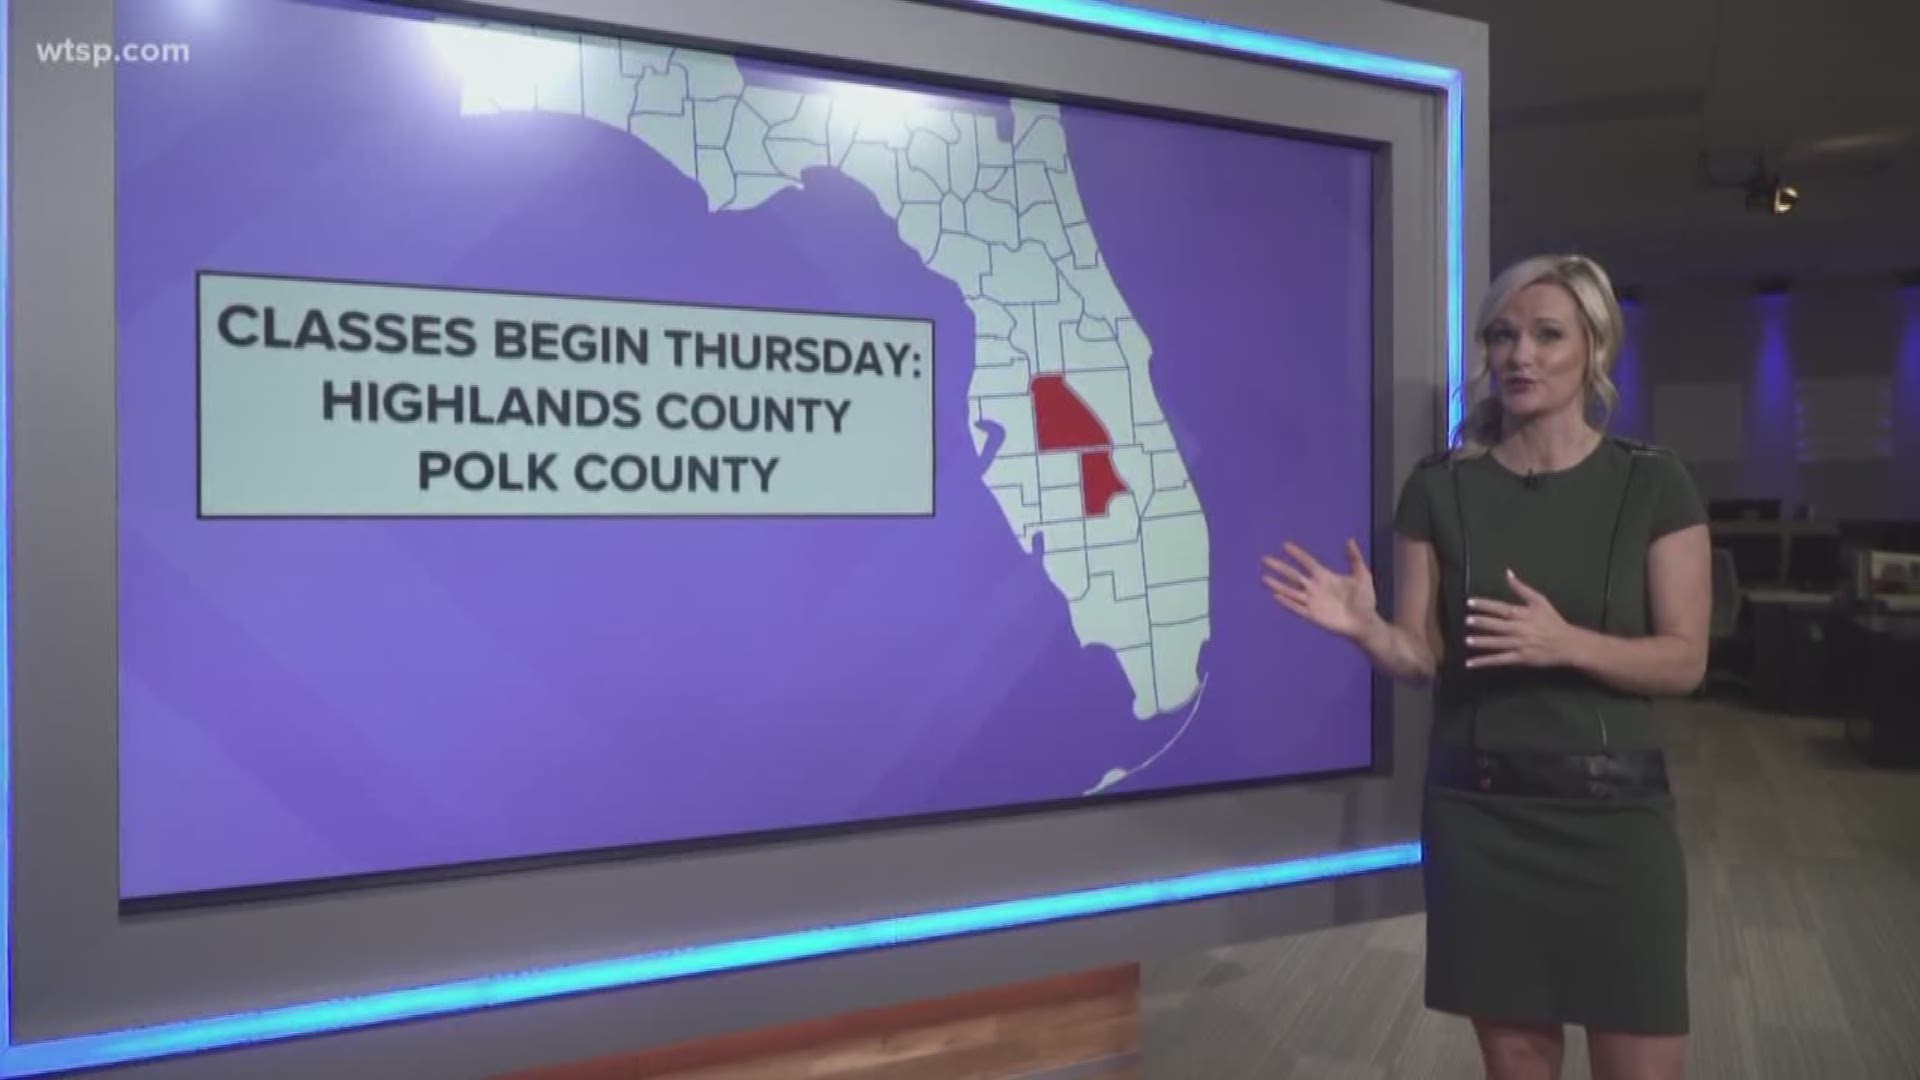 Disney is asking guests to monitor weather updates ahead of arriving. https://on.wtsp.com/2lwOu3A https://on.wtsp.com/2ZrzWFM